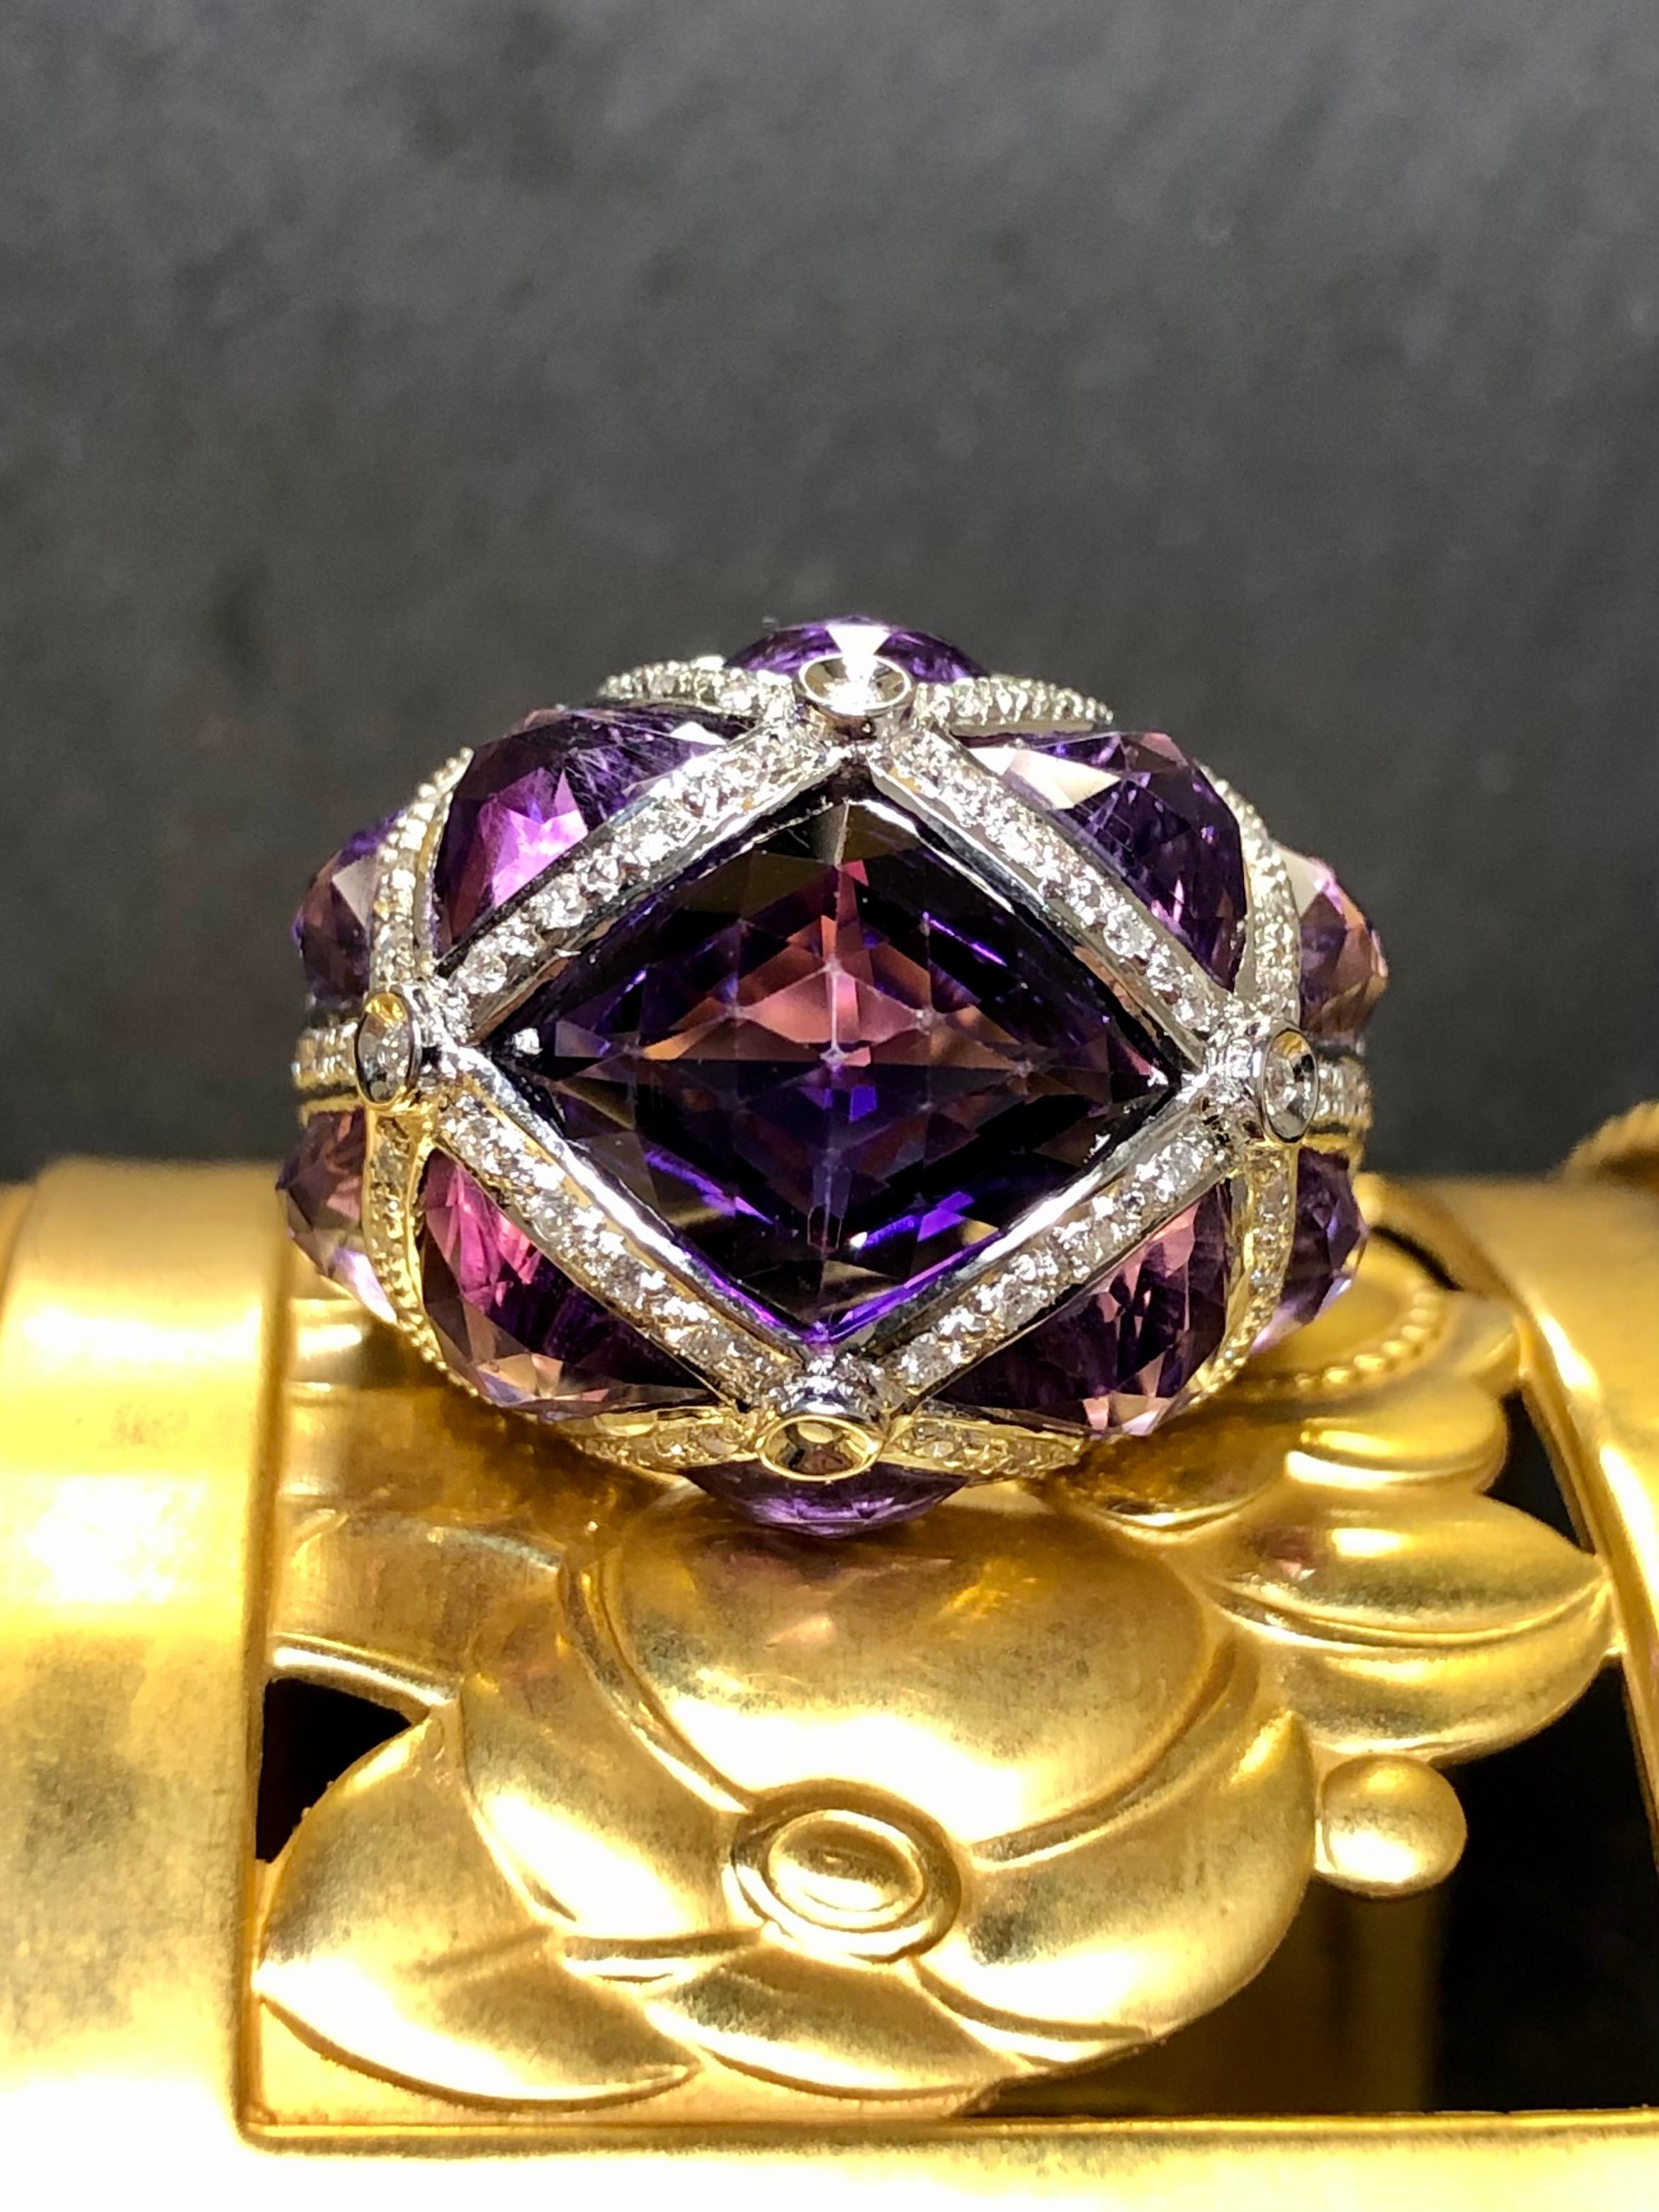 A fabulous cocktail ring done in 18K white gold set with 12.34cttw in fancy cut natural amethyst and .53cttw in G-I color Vs1-2 clarity round diamonds.


Dimensions/Weight:

Rings measures .75” tall and is a size 7. Ring weighs